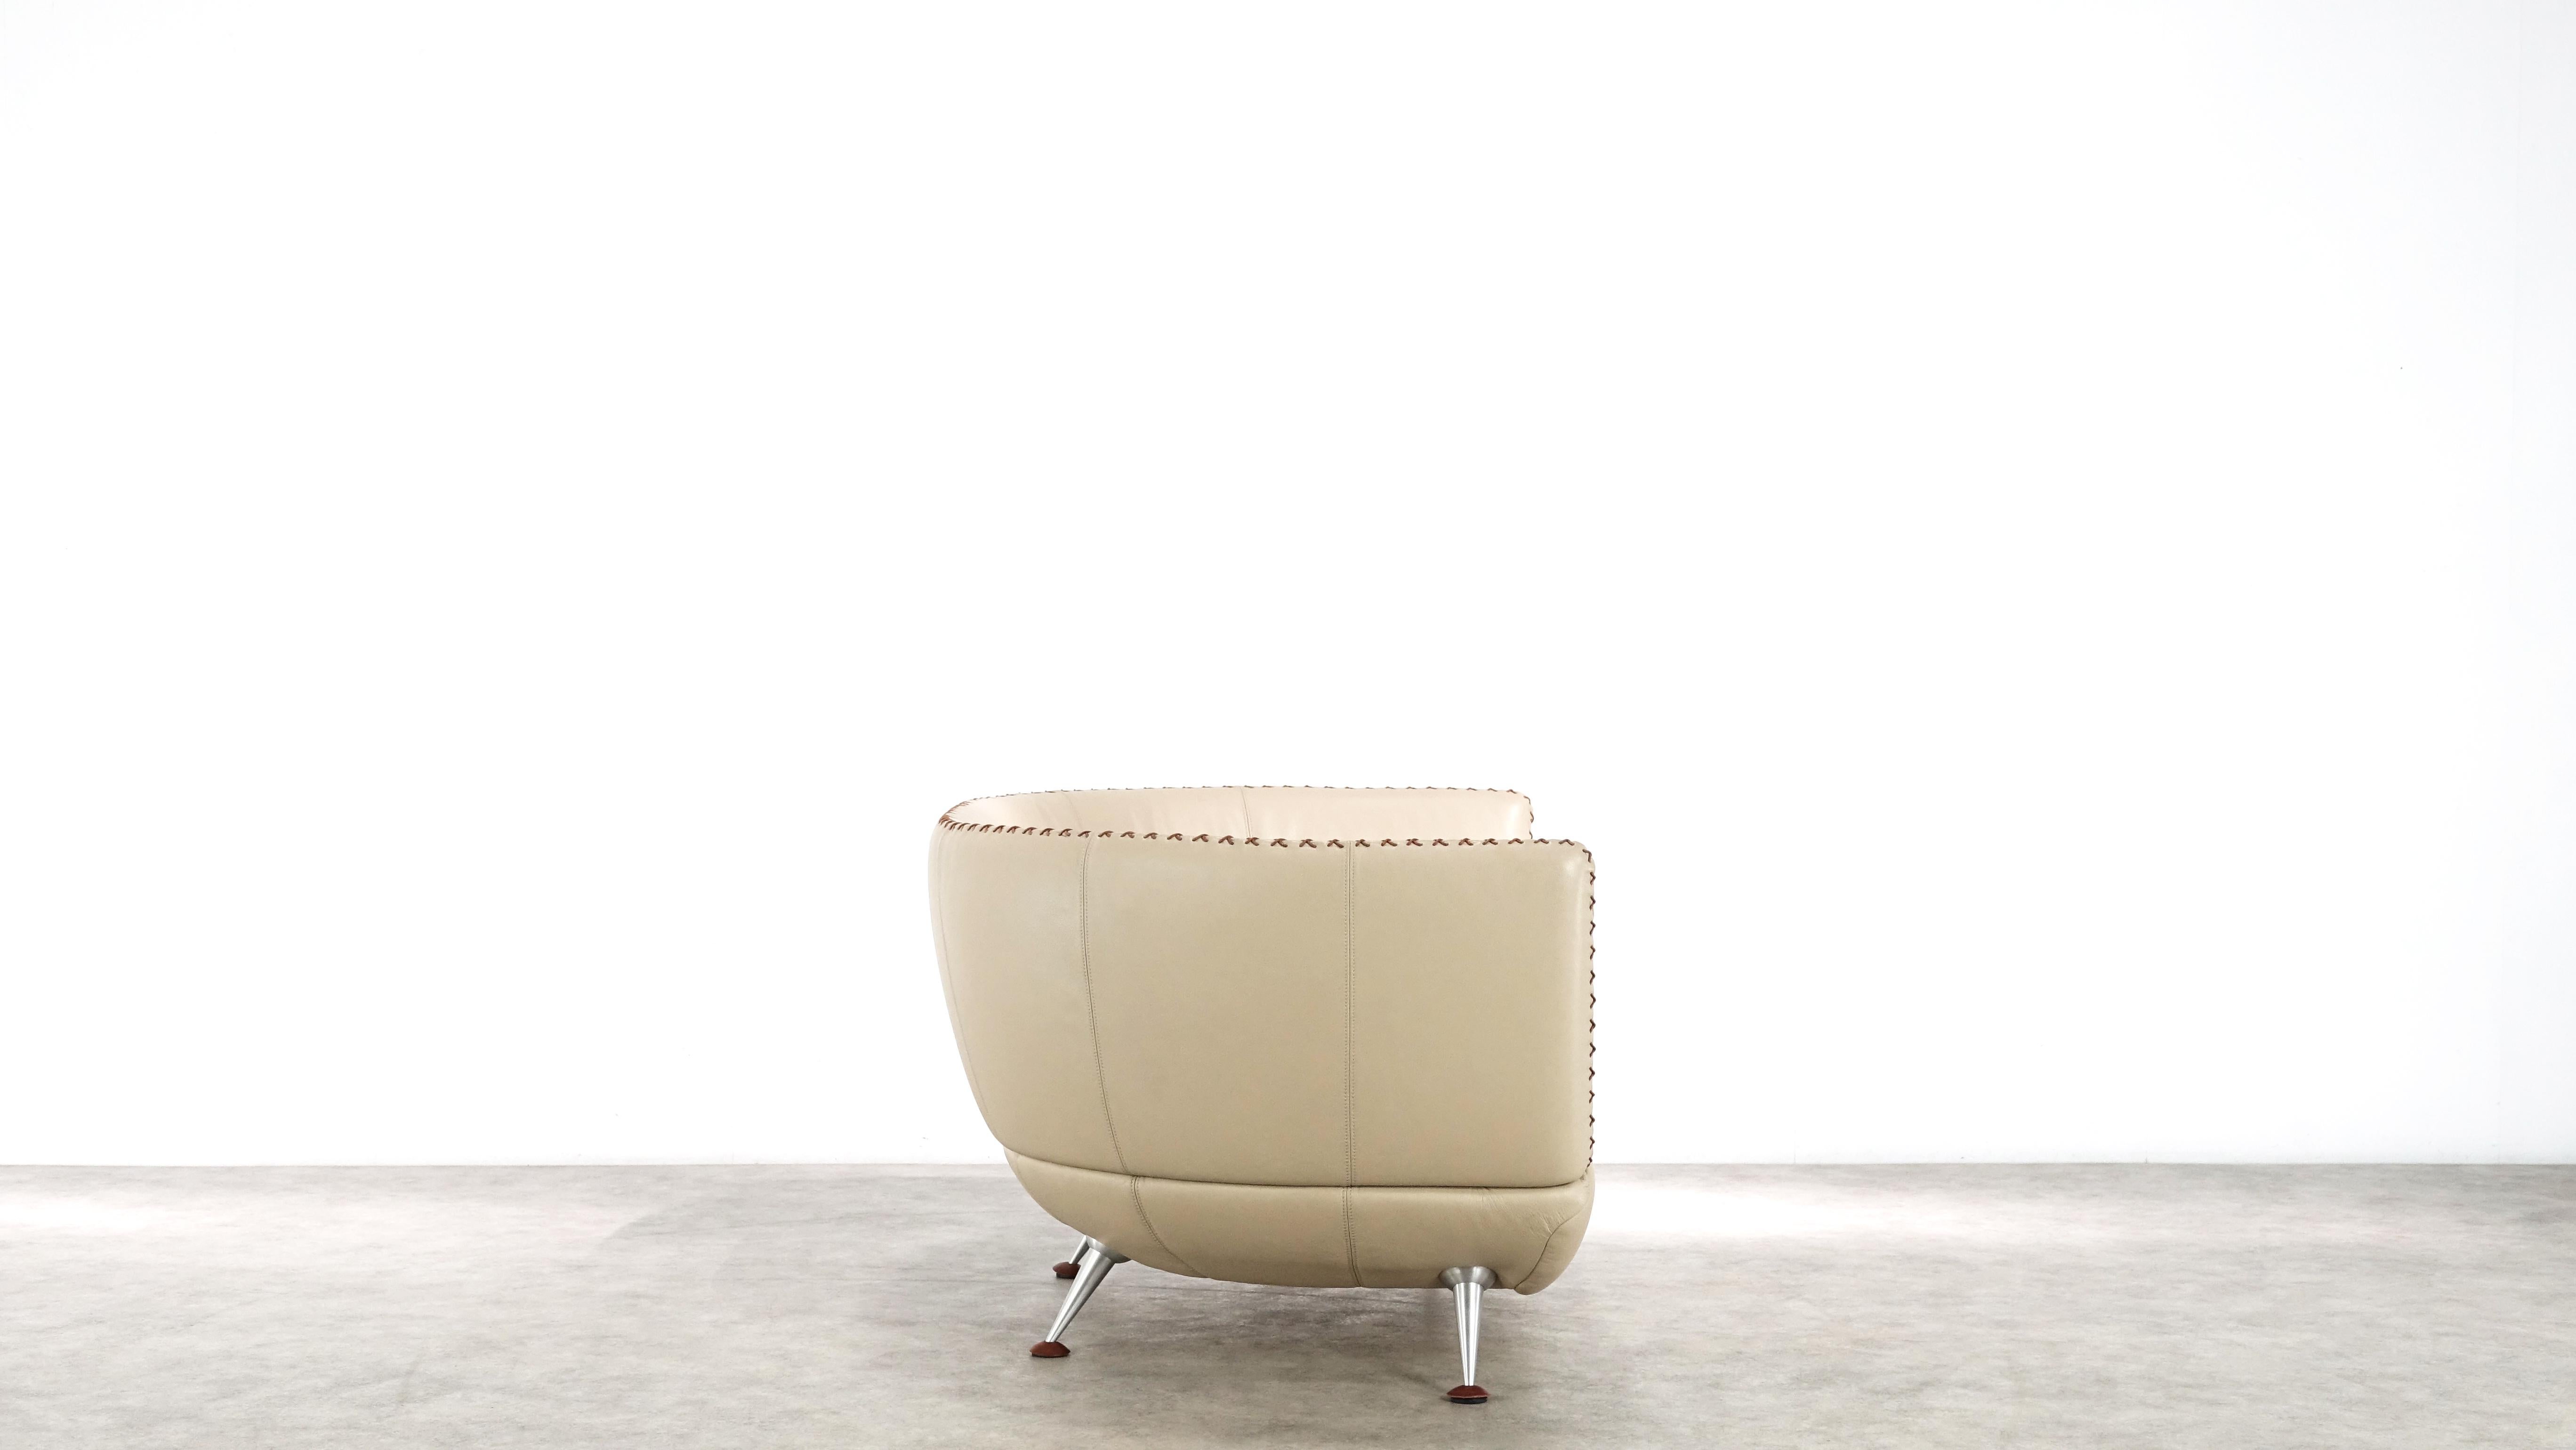 De Sede Ds 102 Two-Seater Sofa in Sand Upholstery by Mathias Hoffmann 2